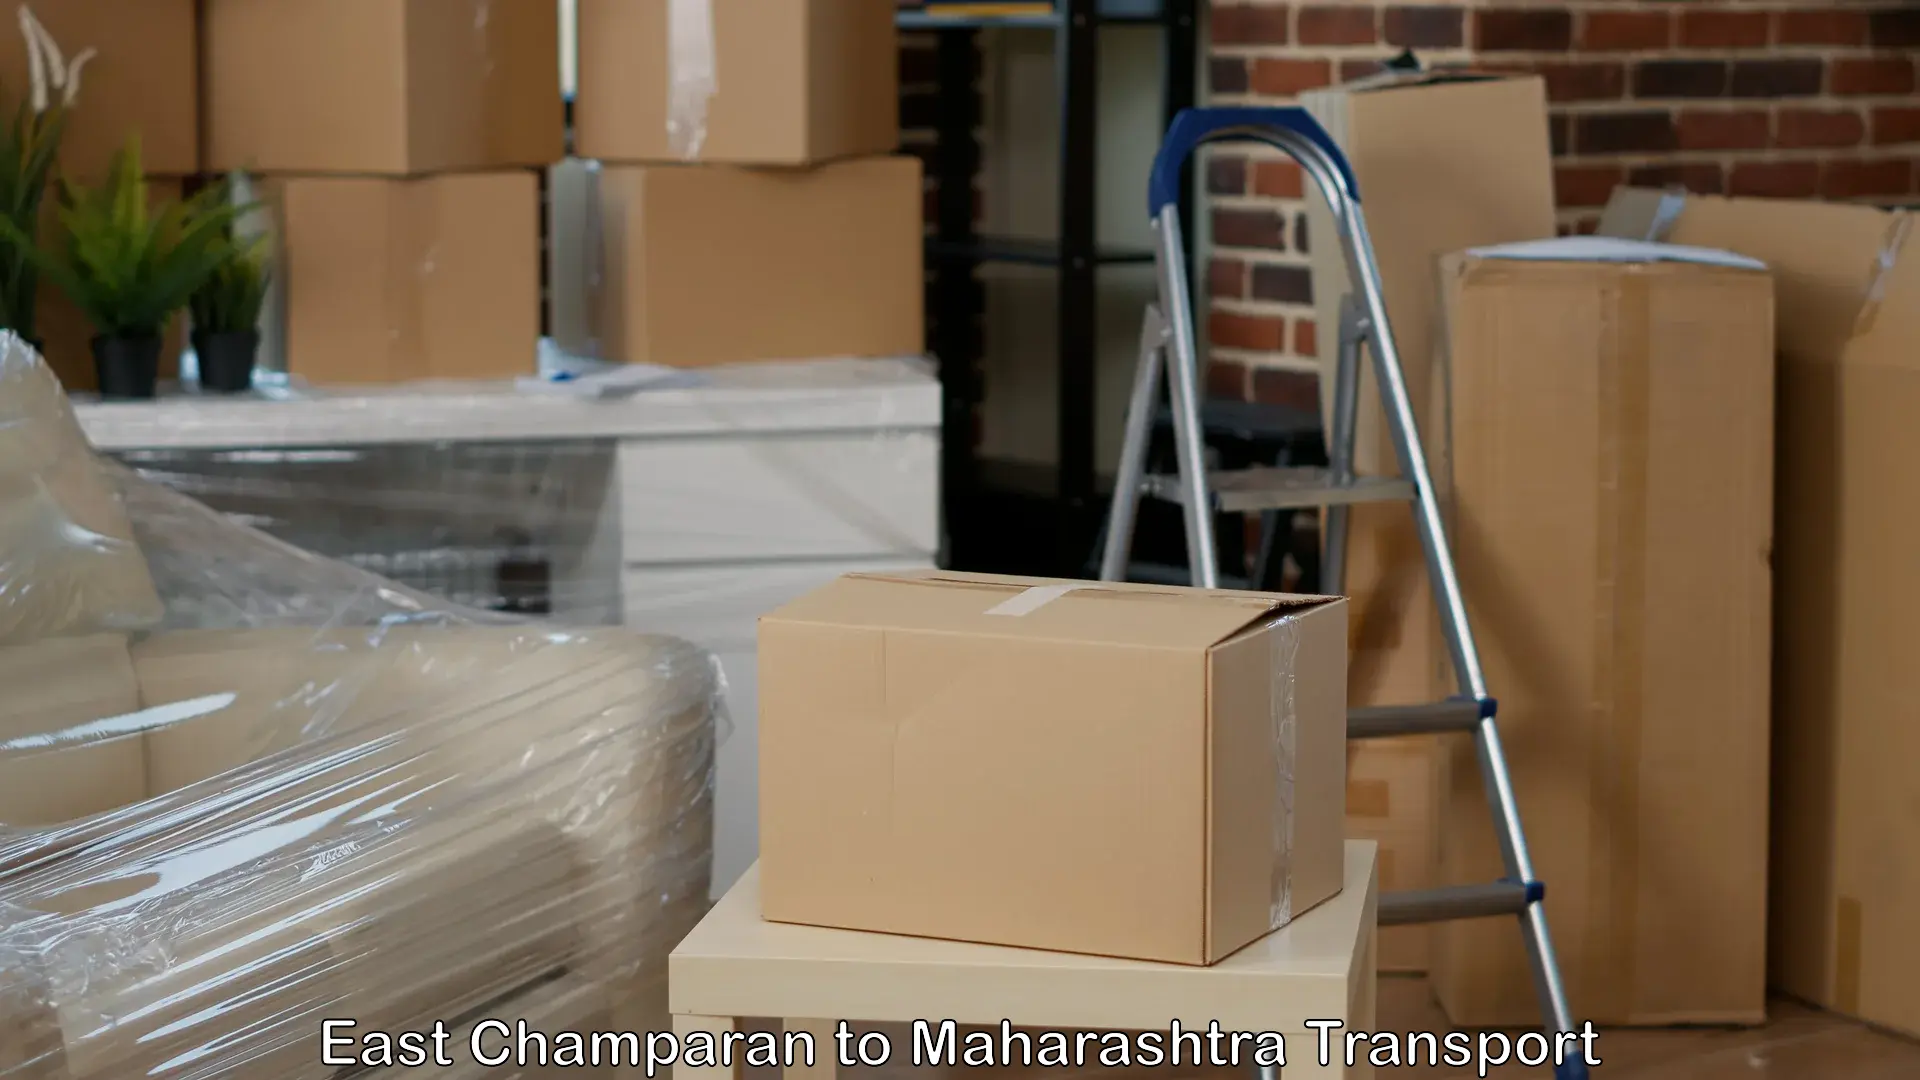 Air cargo transport services in East Champaran to Shirpur